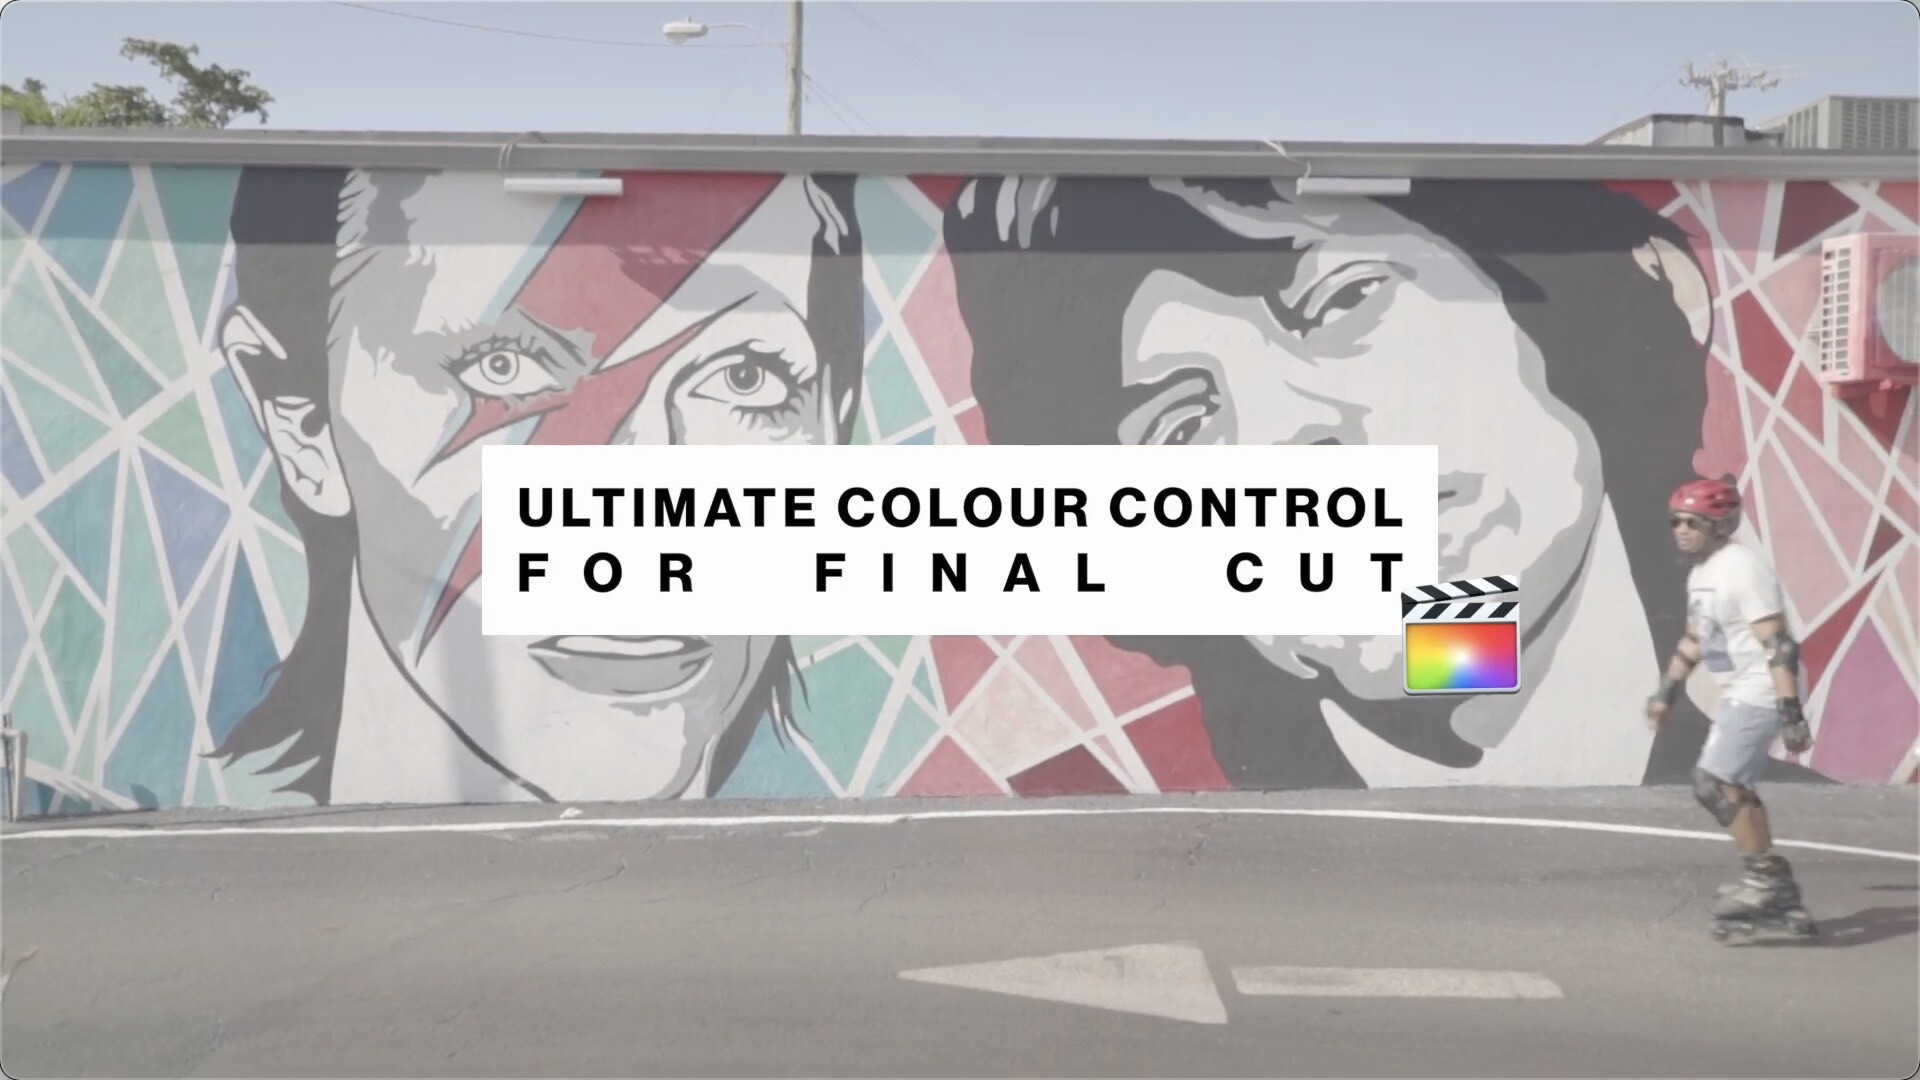 fcpx插件:终极色彩控制插件Ultimate Colour Control